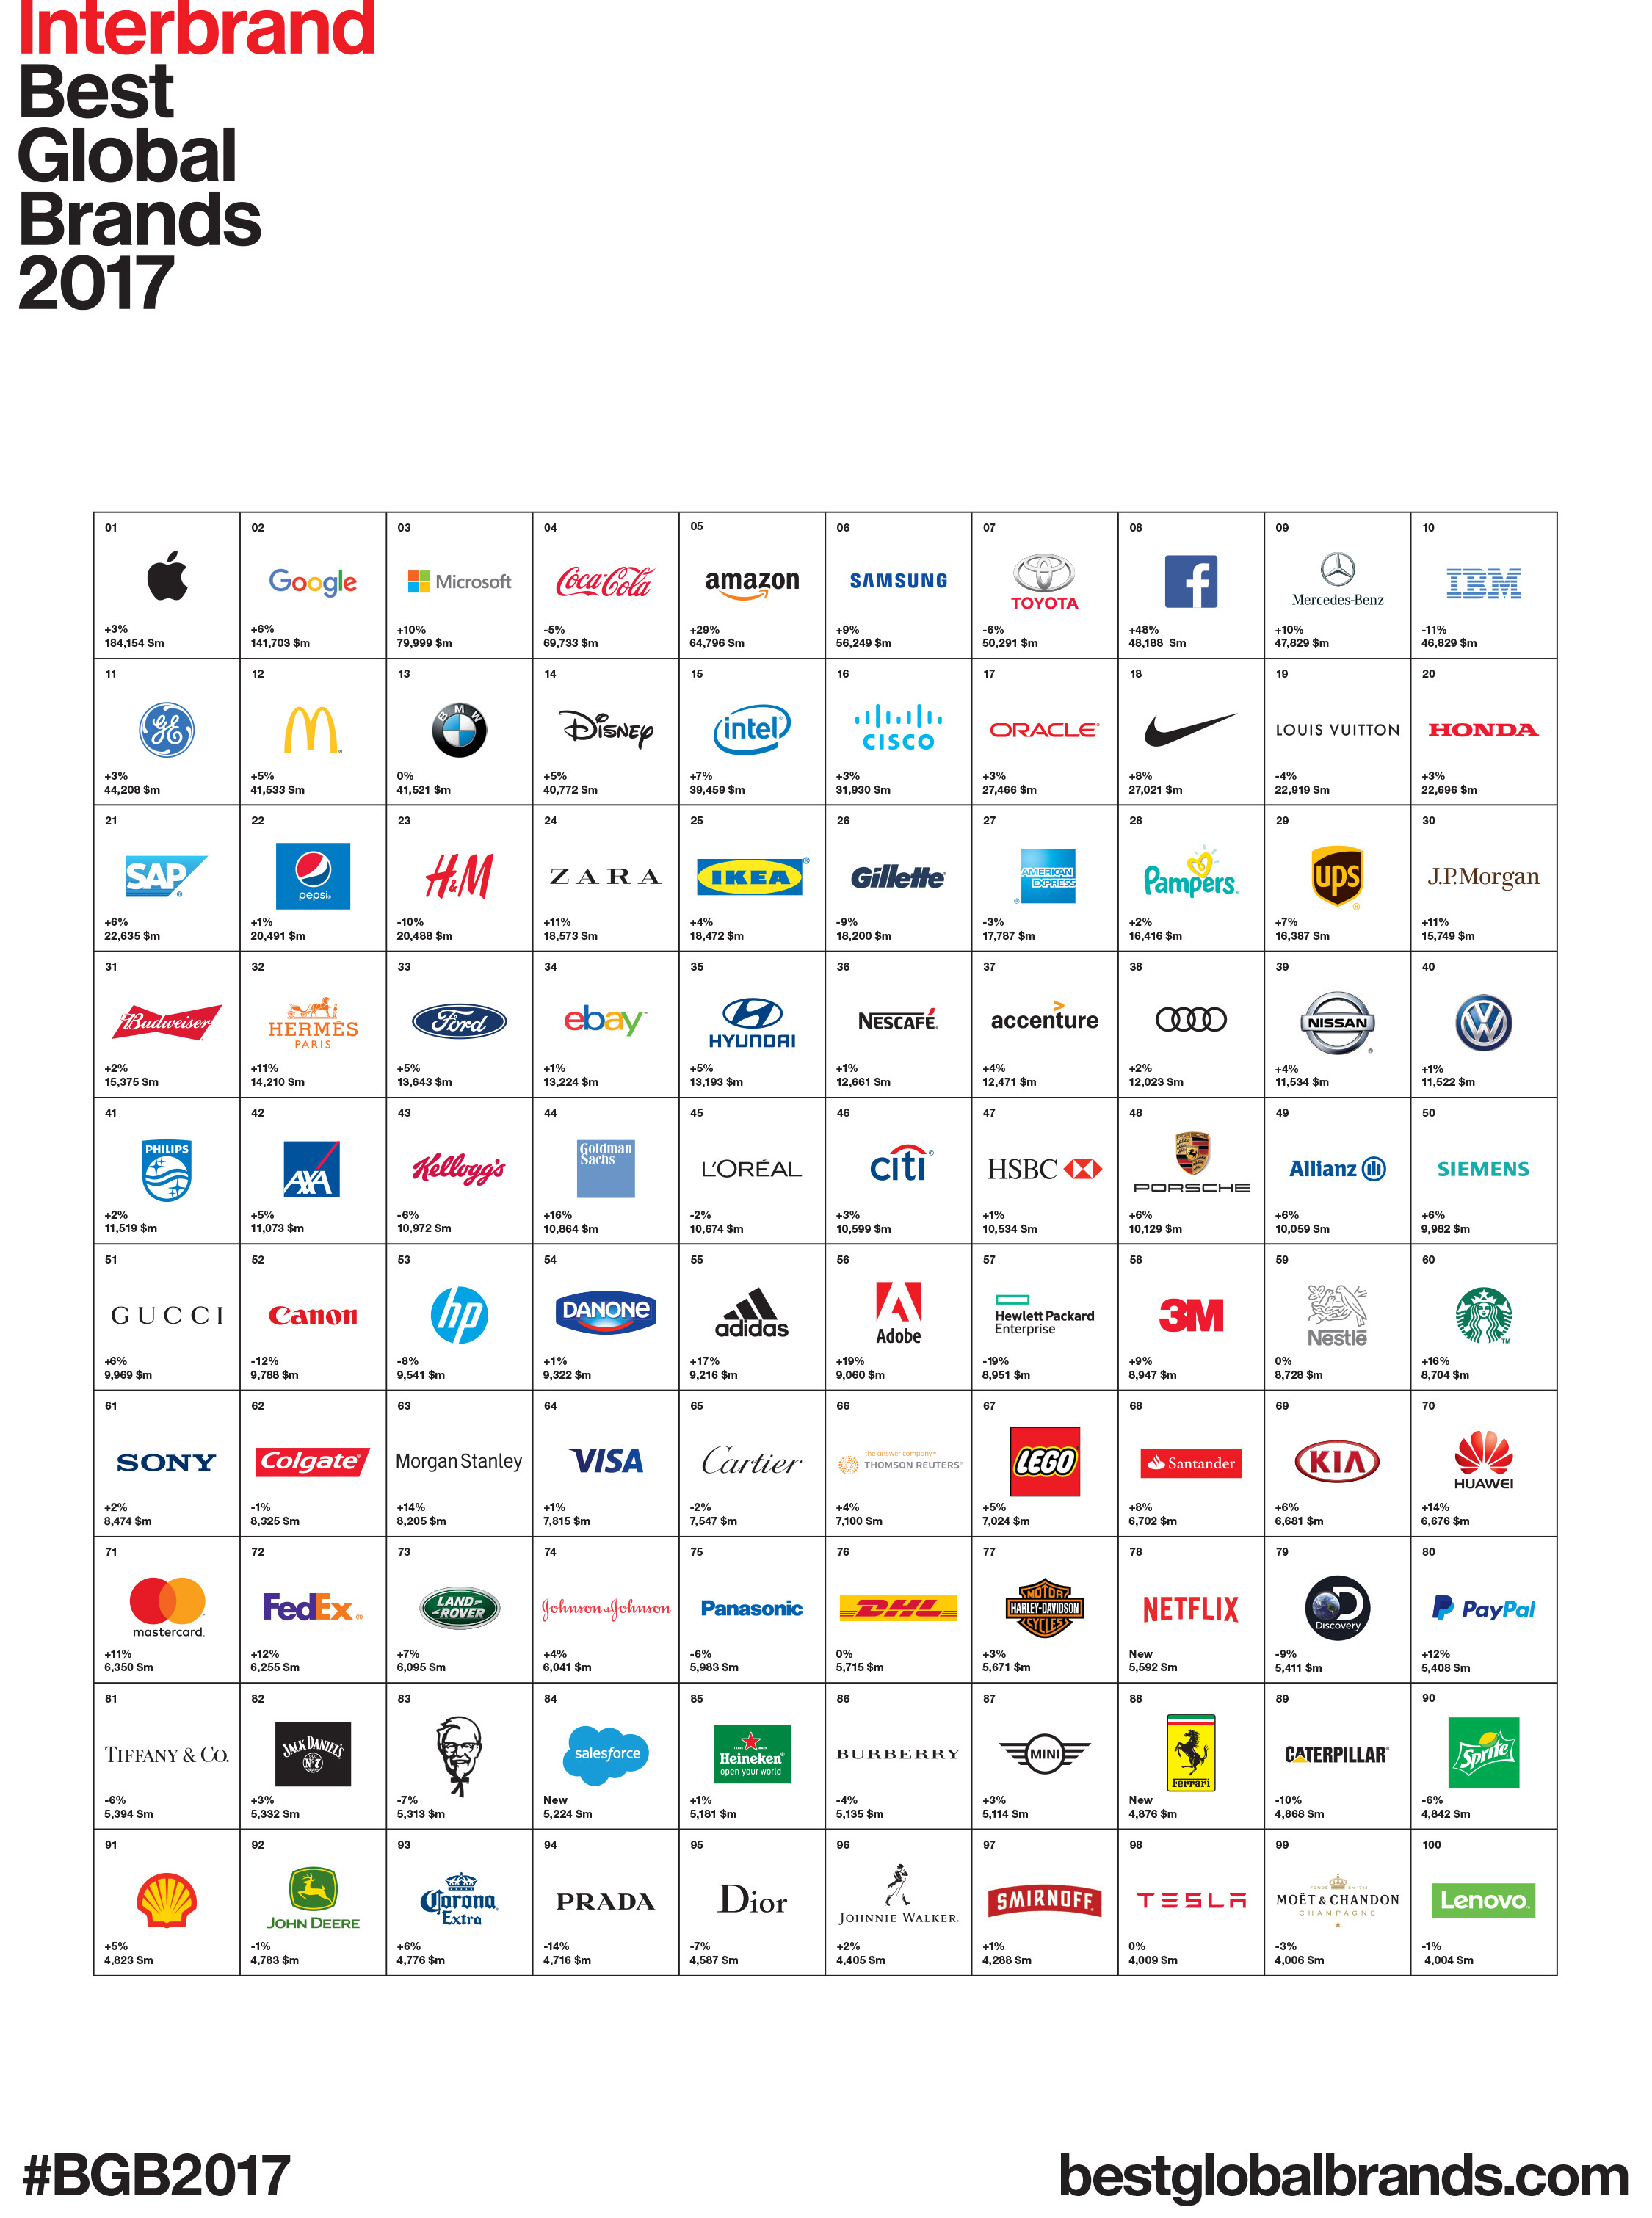 Interbrand Releases 2017 Best Global Brands Report: Apple and Google